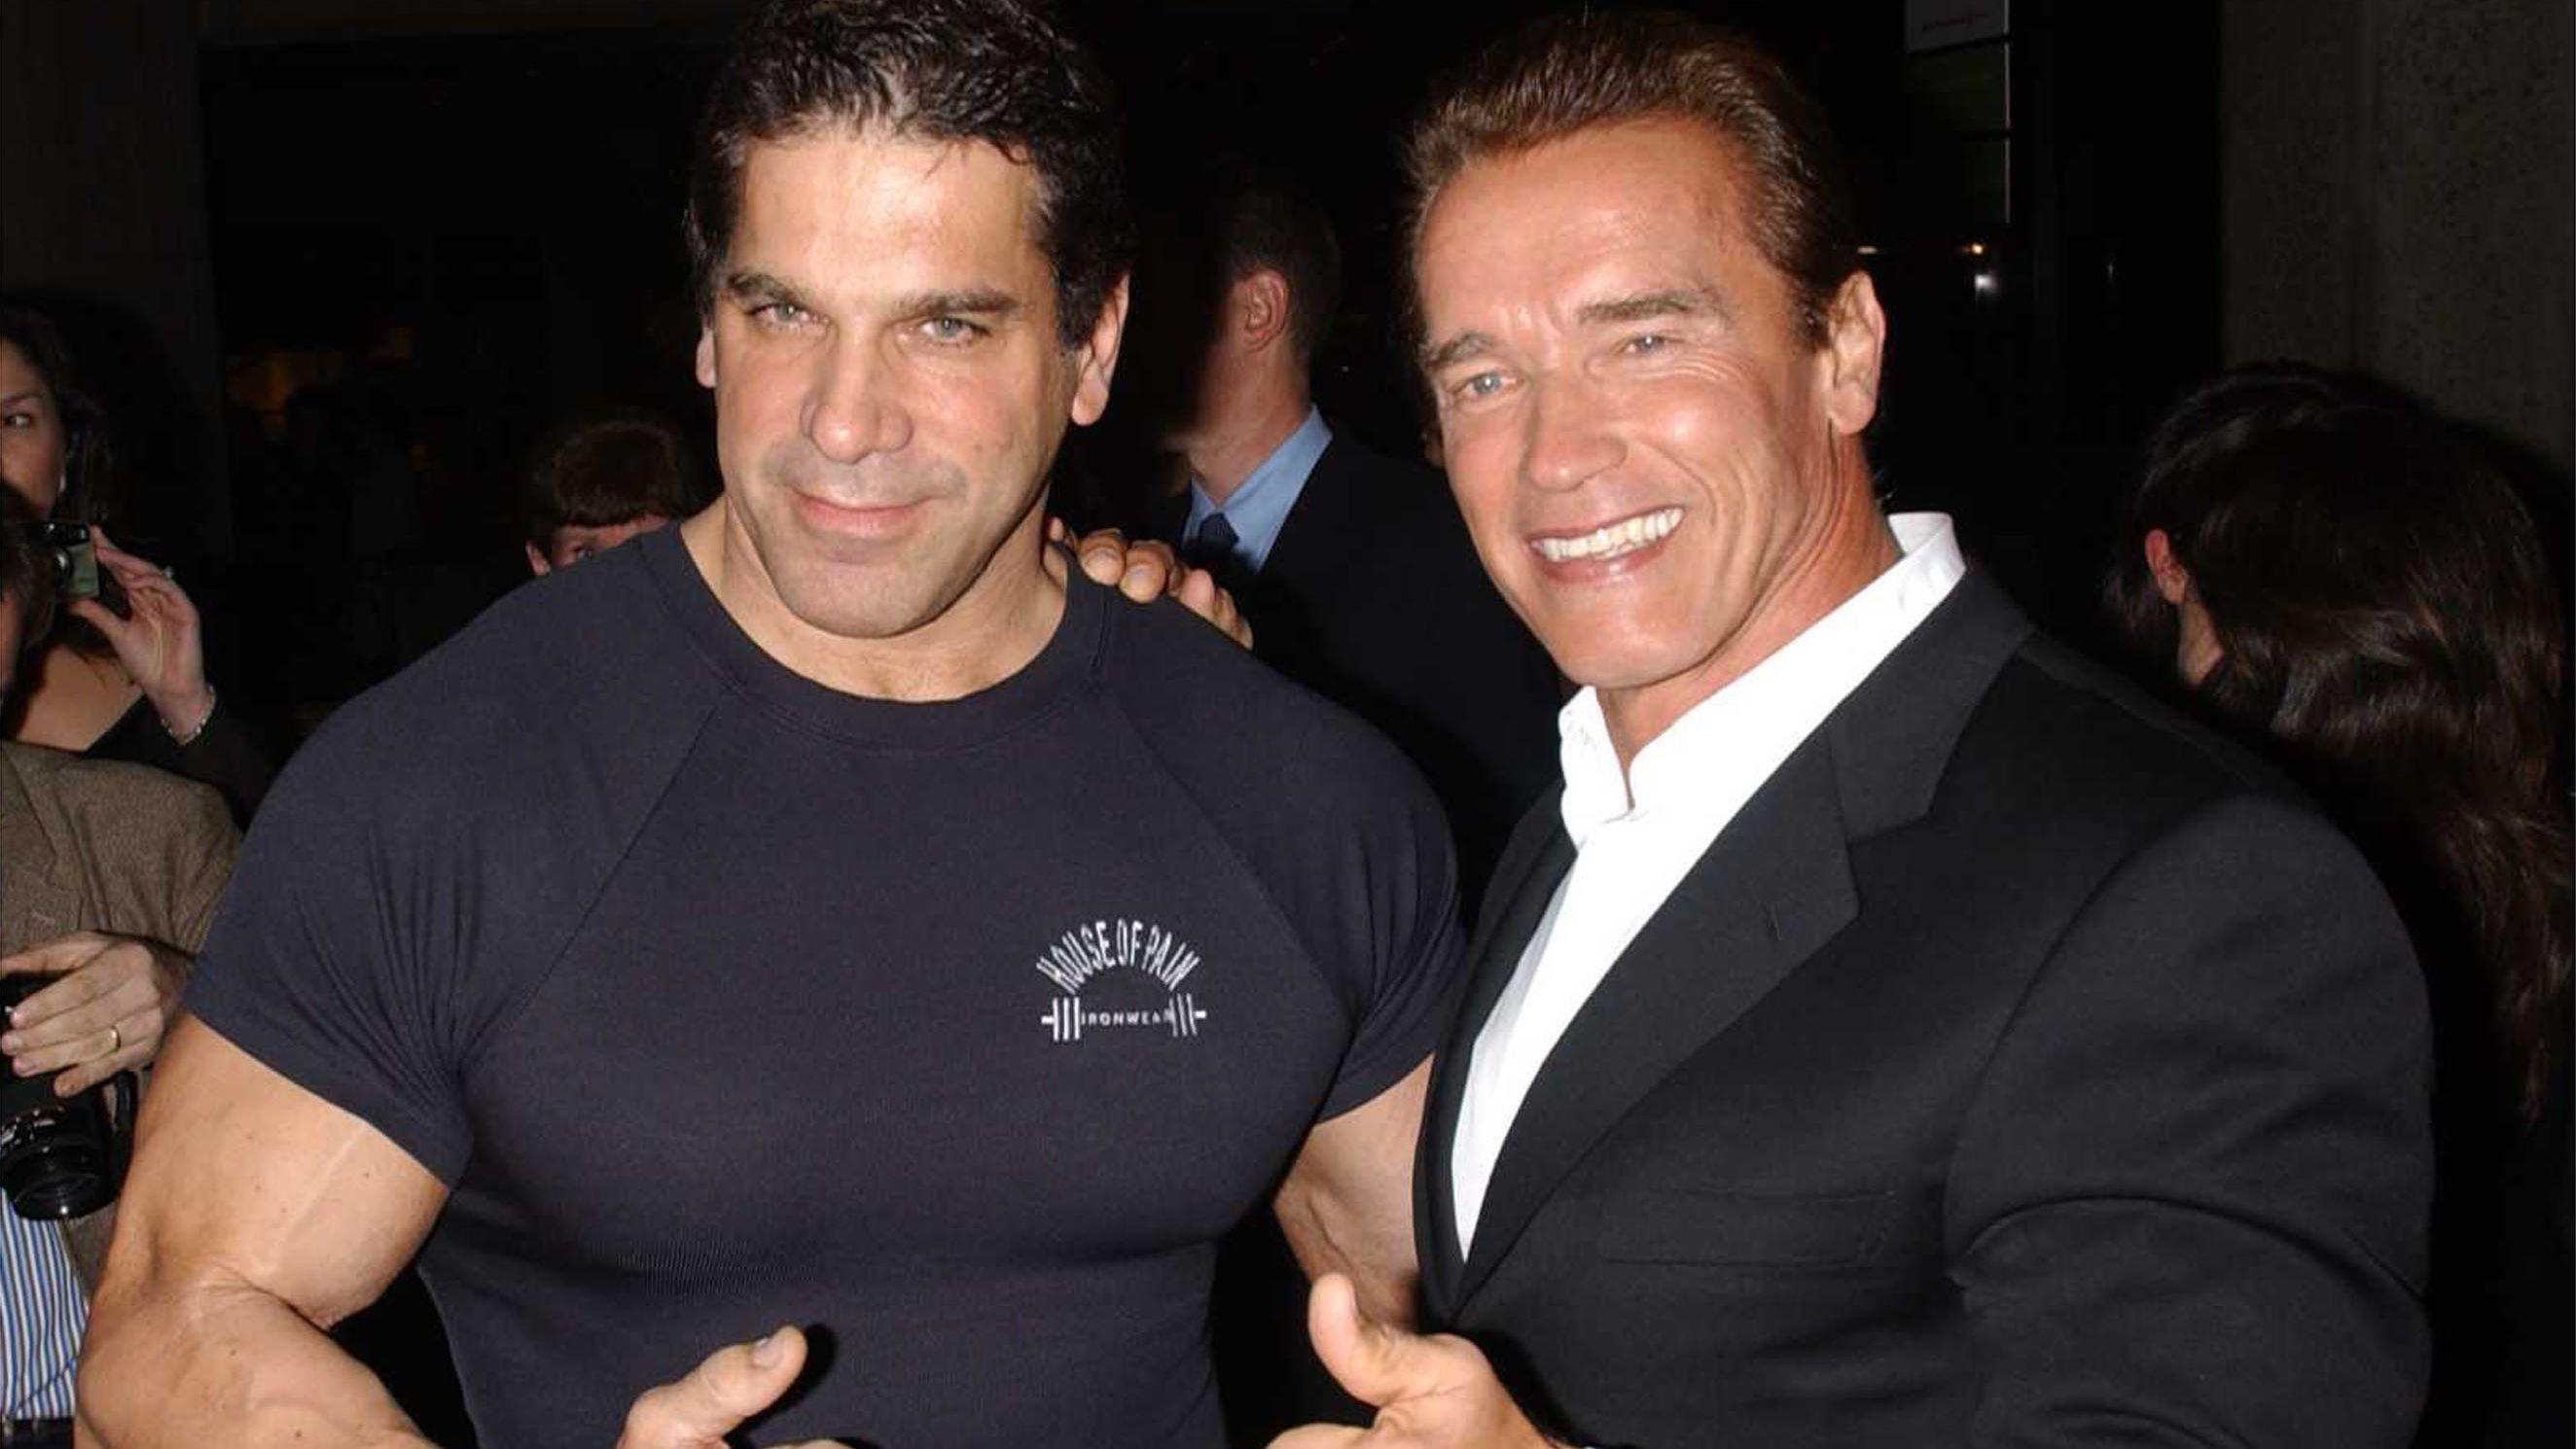 Arnold Schwarzenegger and Lou Ferrigno posing for the camera at Pumping Iron's 25th Anniversary